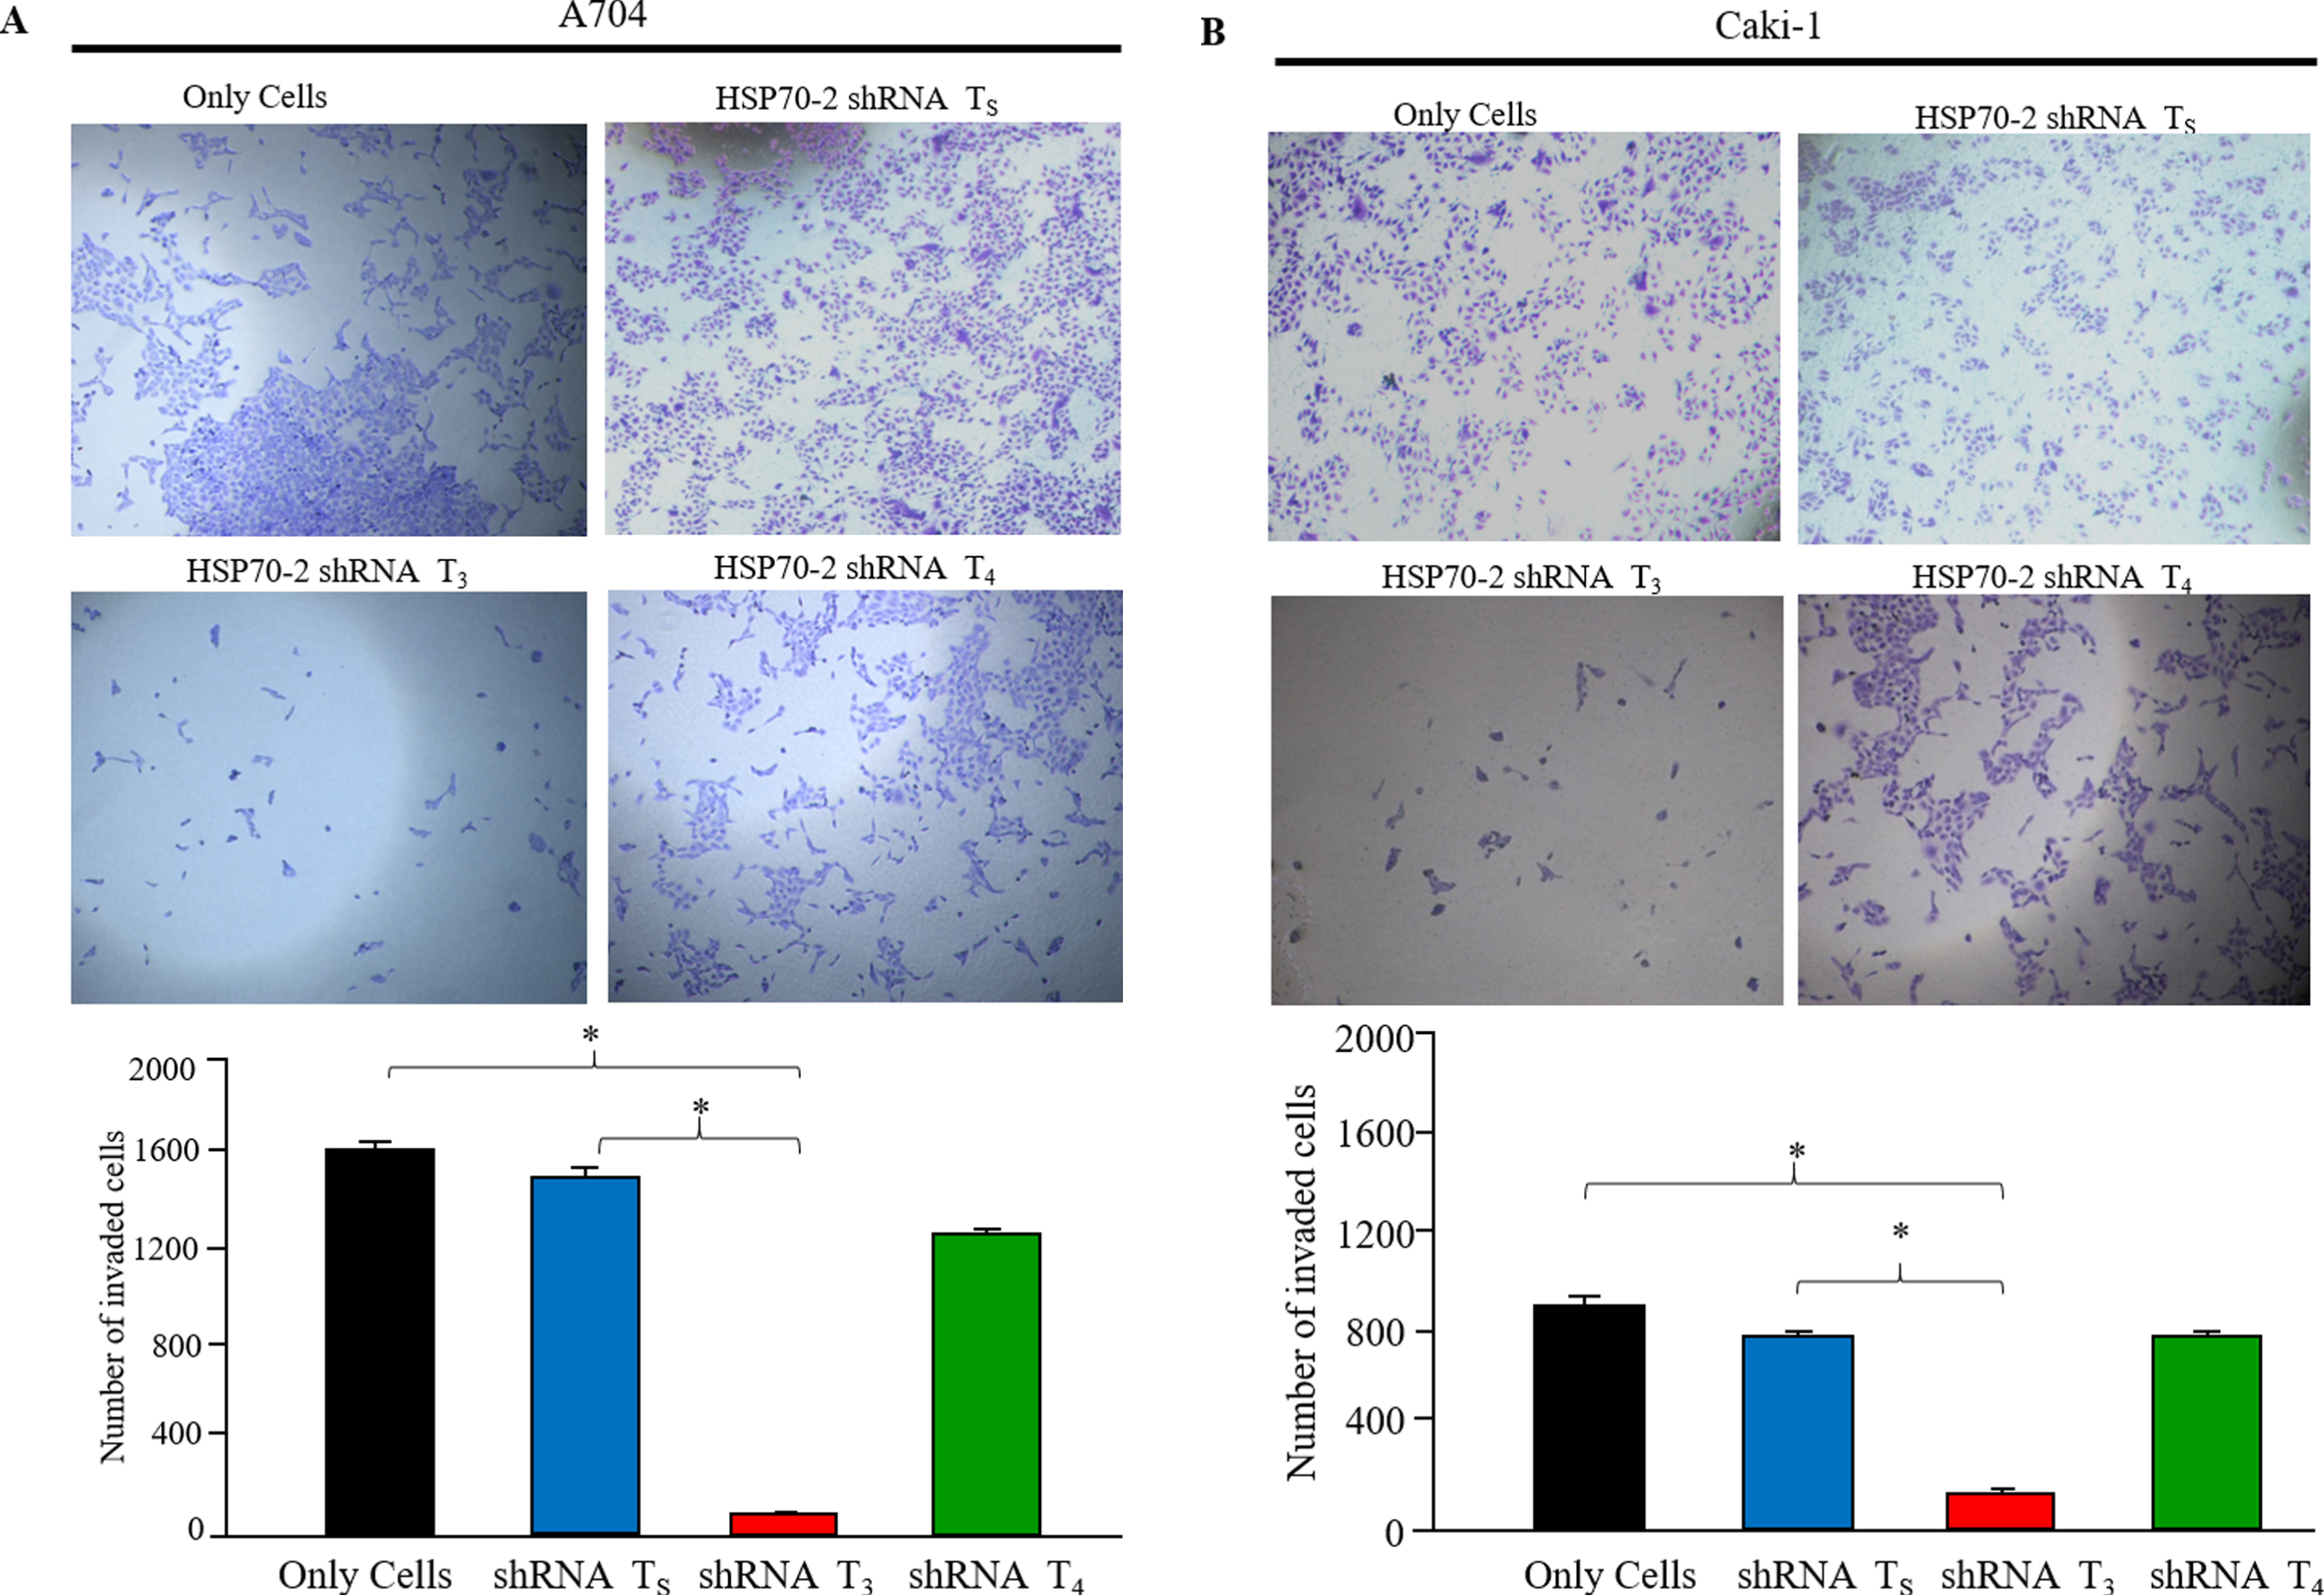 HSP70-2 knockdown inhibits the invasive property of RCC cells. Invasion assay were carried out in A704 and Caki-1 cells by transient transfection using HSP70-2 shRNA T3 or shRNA T4 or shRNA TS. (a) A704 and (b) Caki-1 cells showing reduction in number of invaded cells when transfected with HSP70-2 shRNA T3 as compared to the cells transfected with shRNA T4 or shRNA TS. However only cells failed to show any significant inhibition in invasive property of cancer cells. Representative histogram revealed significant reduction in number of invaded cells when transfected with shRNA T3 as compared to cells transfected with shRNA TS or shRNA T4 or only cells. n = 3 independent experiments; each experiment was performed in triplicate. Points, mean; bars, SE. statistical significance  *, P <  #x003C;<  #x200A;0.0001.